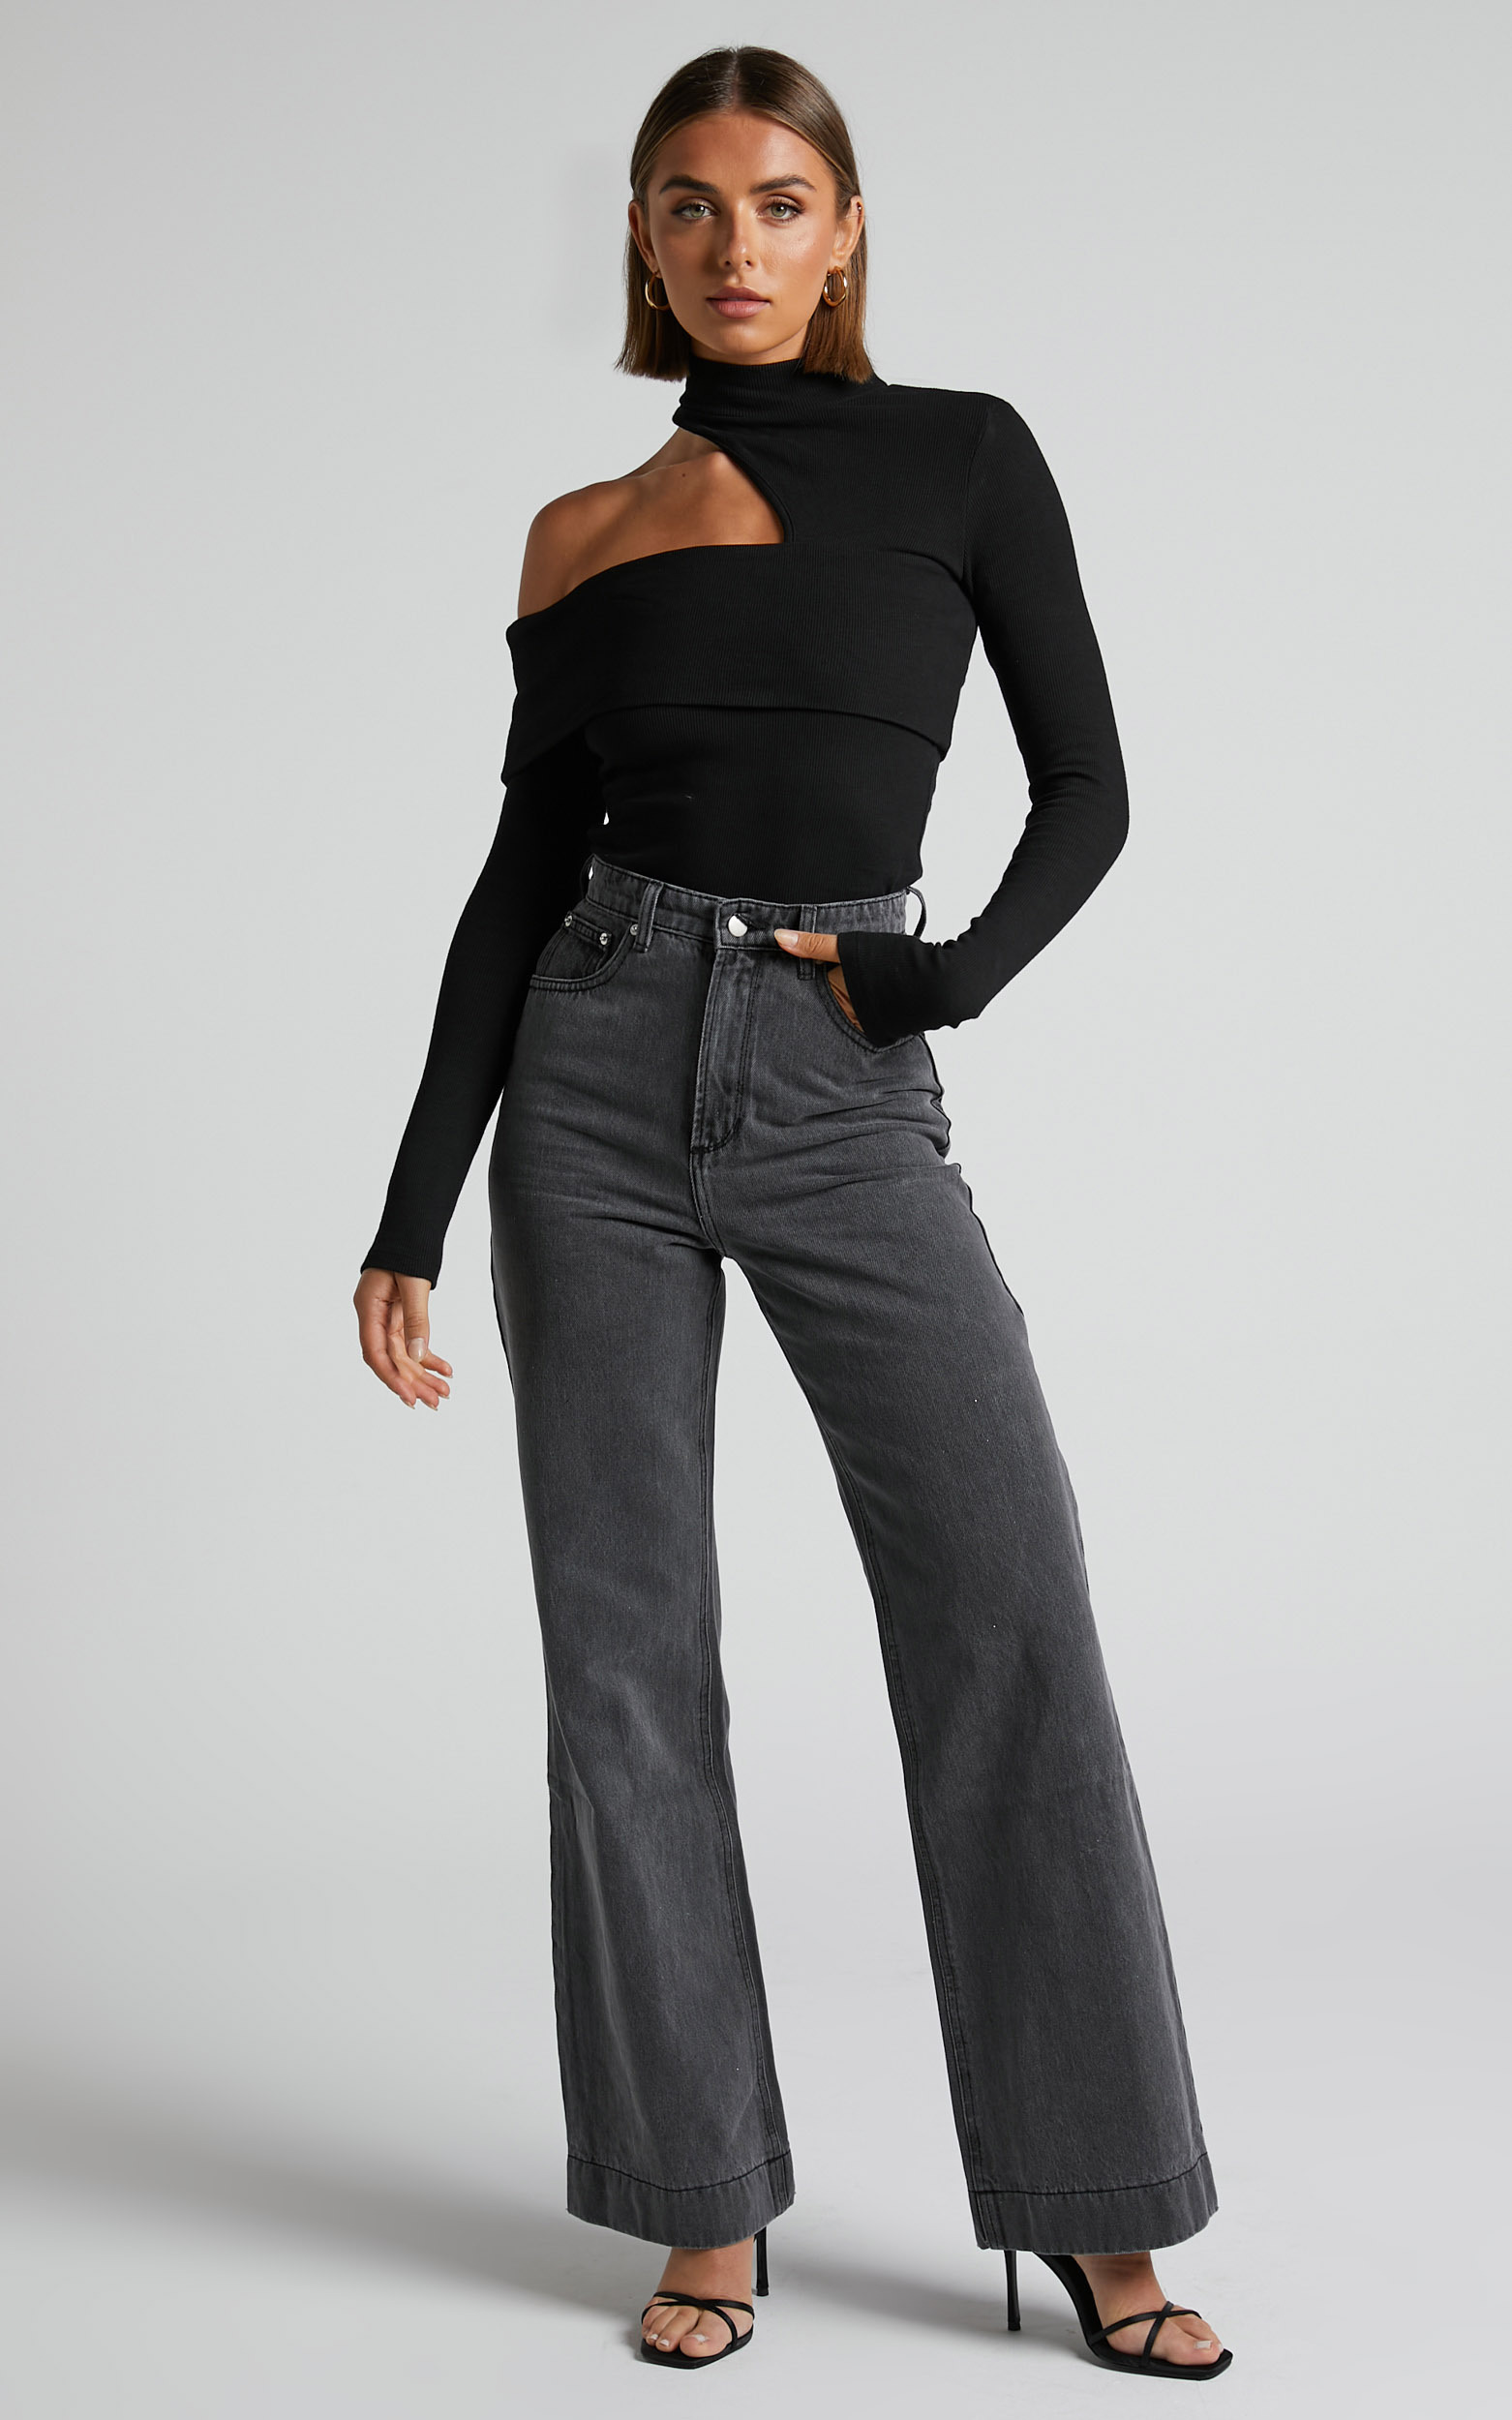 Emman Recycled Cotton Wide Leg Jeans in Washed Black - 04, BLK1, hi-res image number null